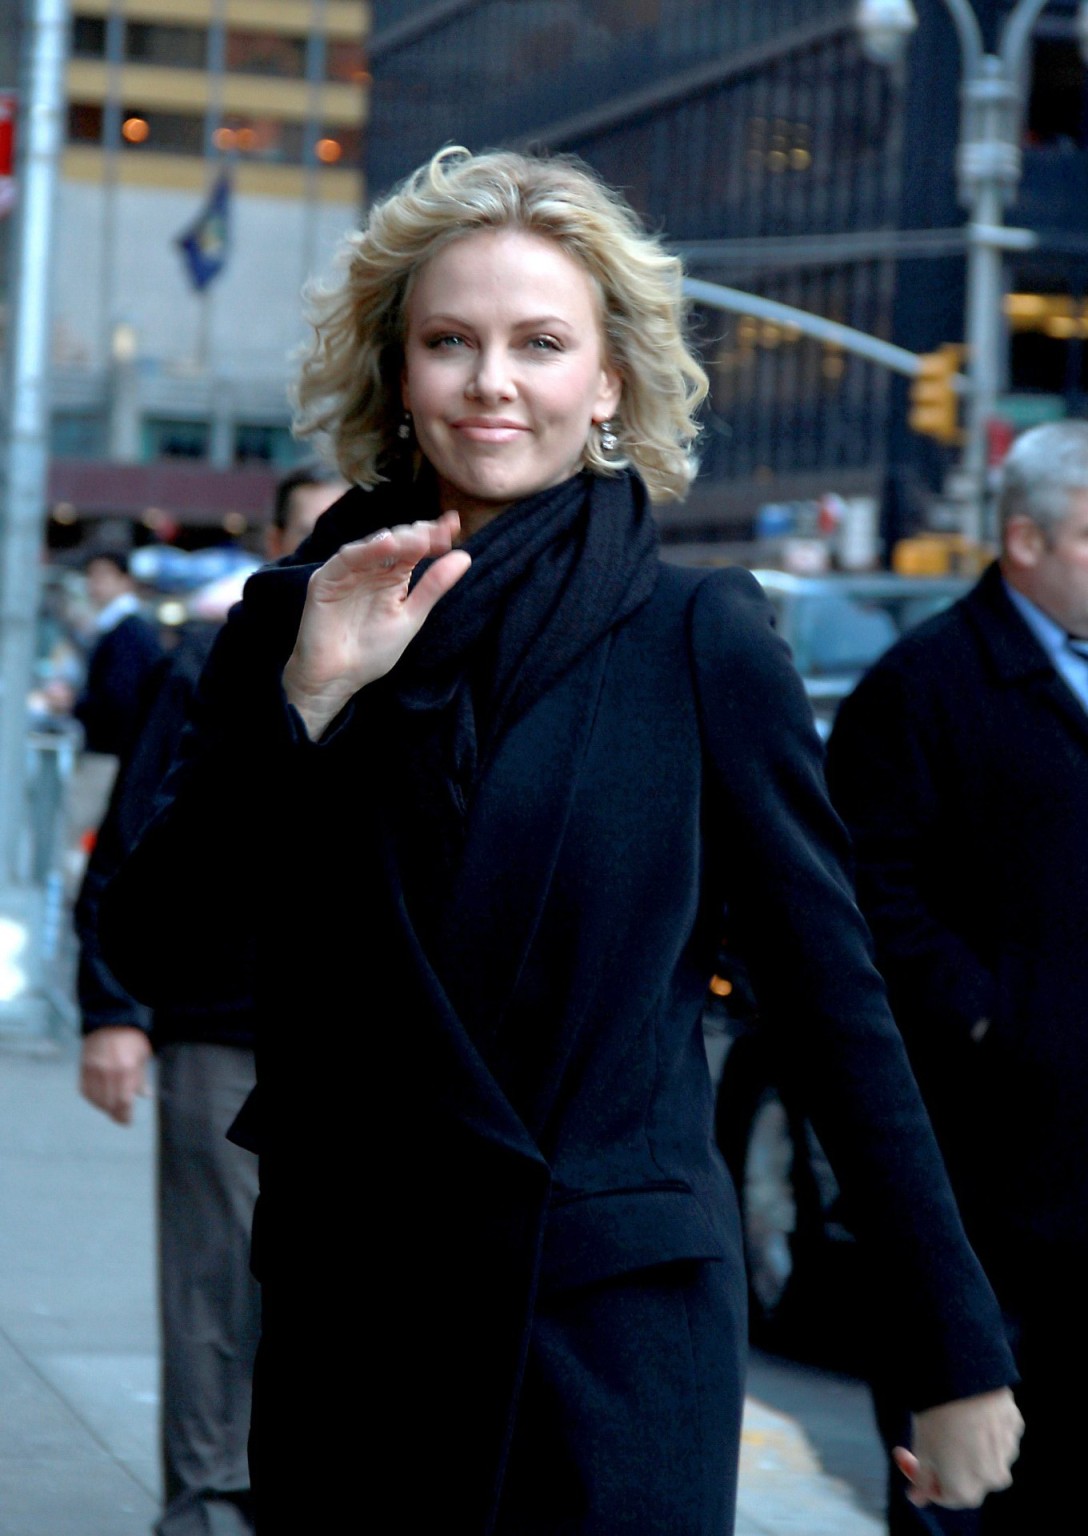 Charlize Theron looks very sexy leaving the Letterman's show in NYC #75277881